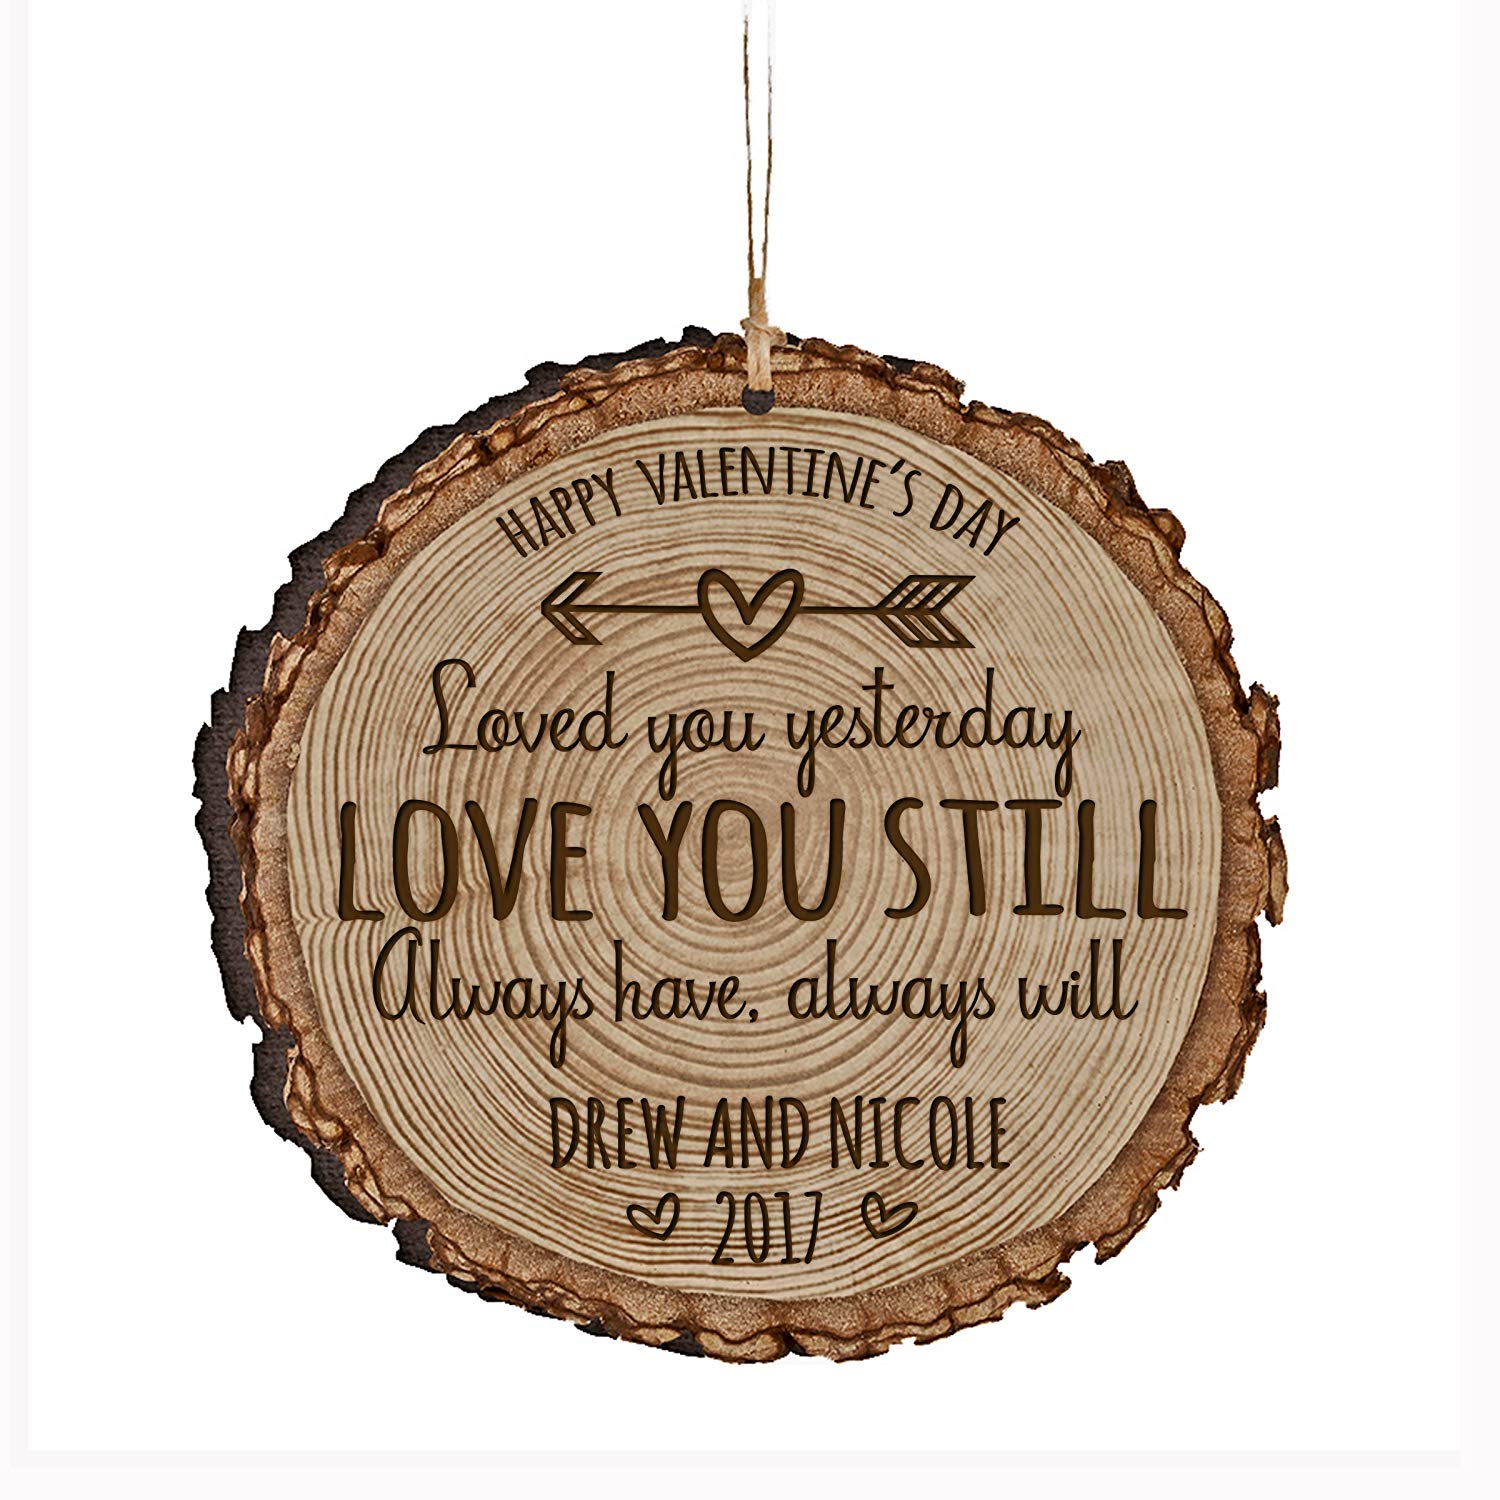 Personalized Engraved Wooden Valentines Ornament Gift - Love You Still - LifeSong Milestones